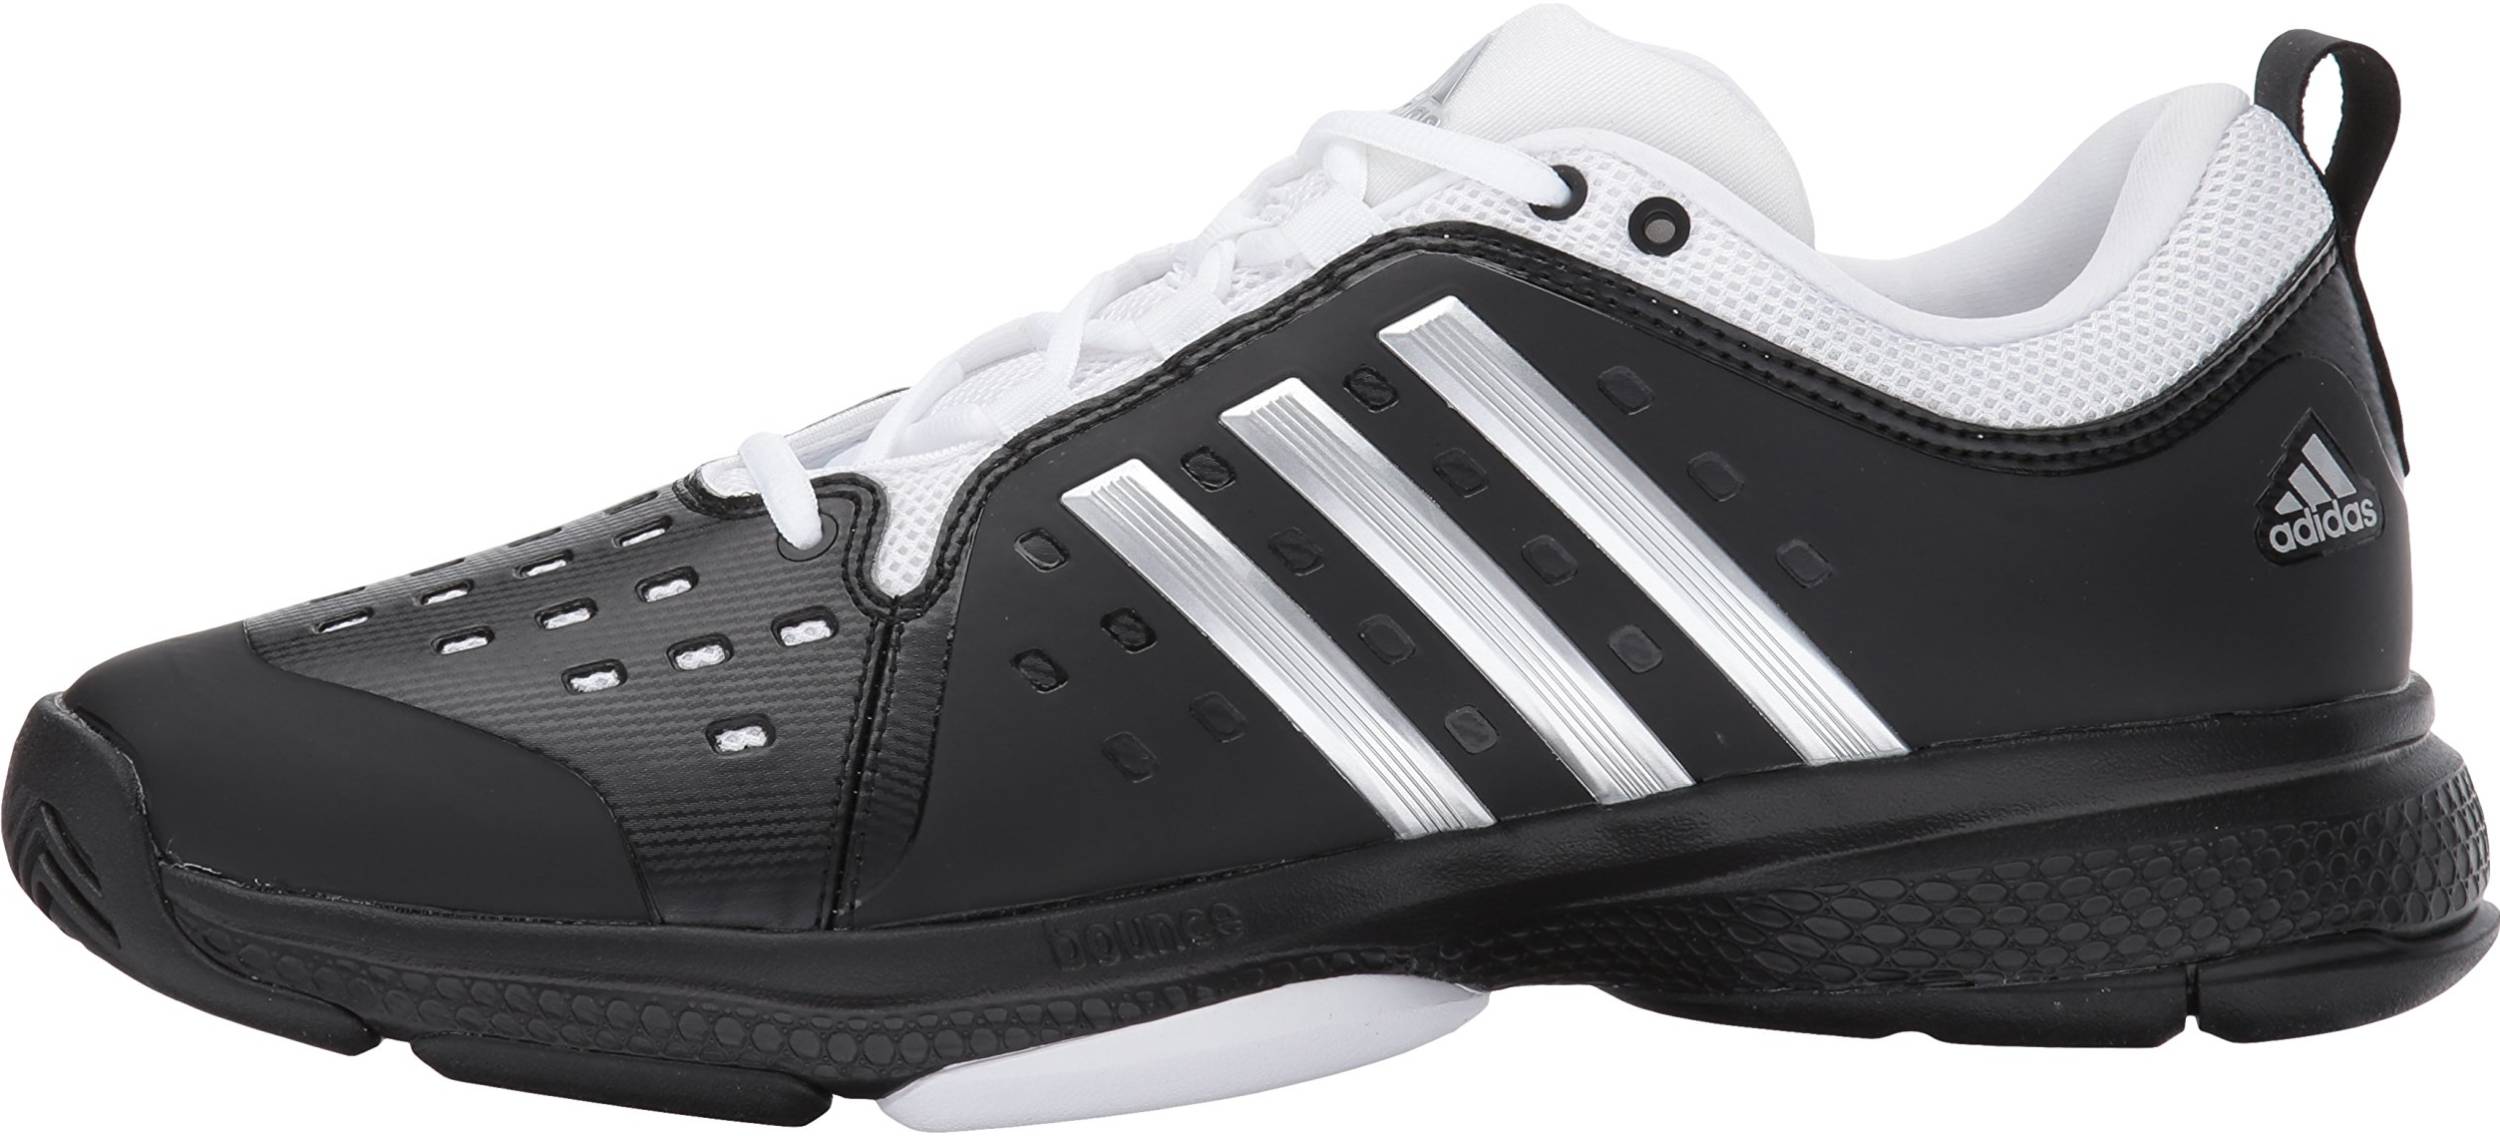 adidas best tennis shoes